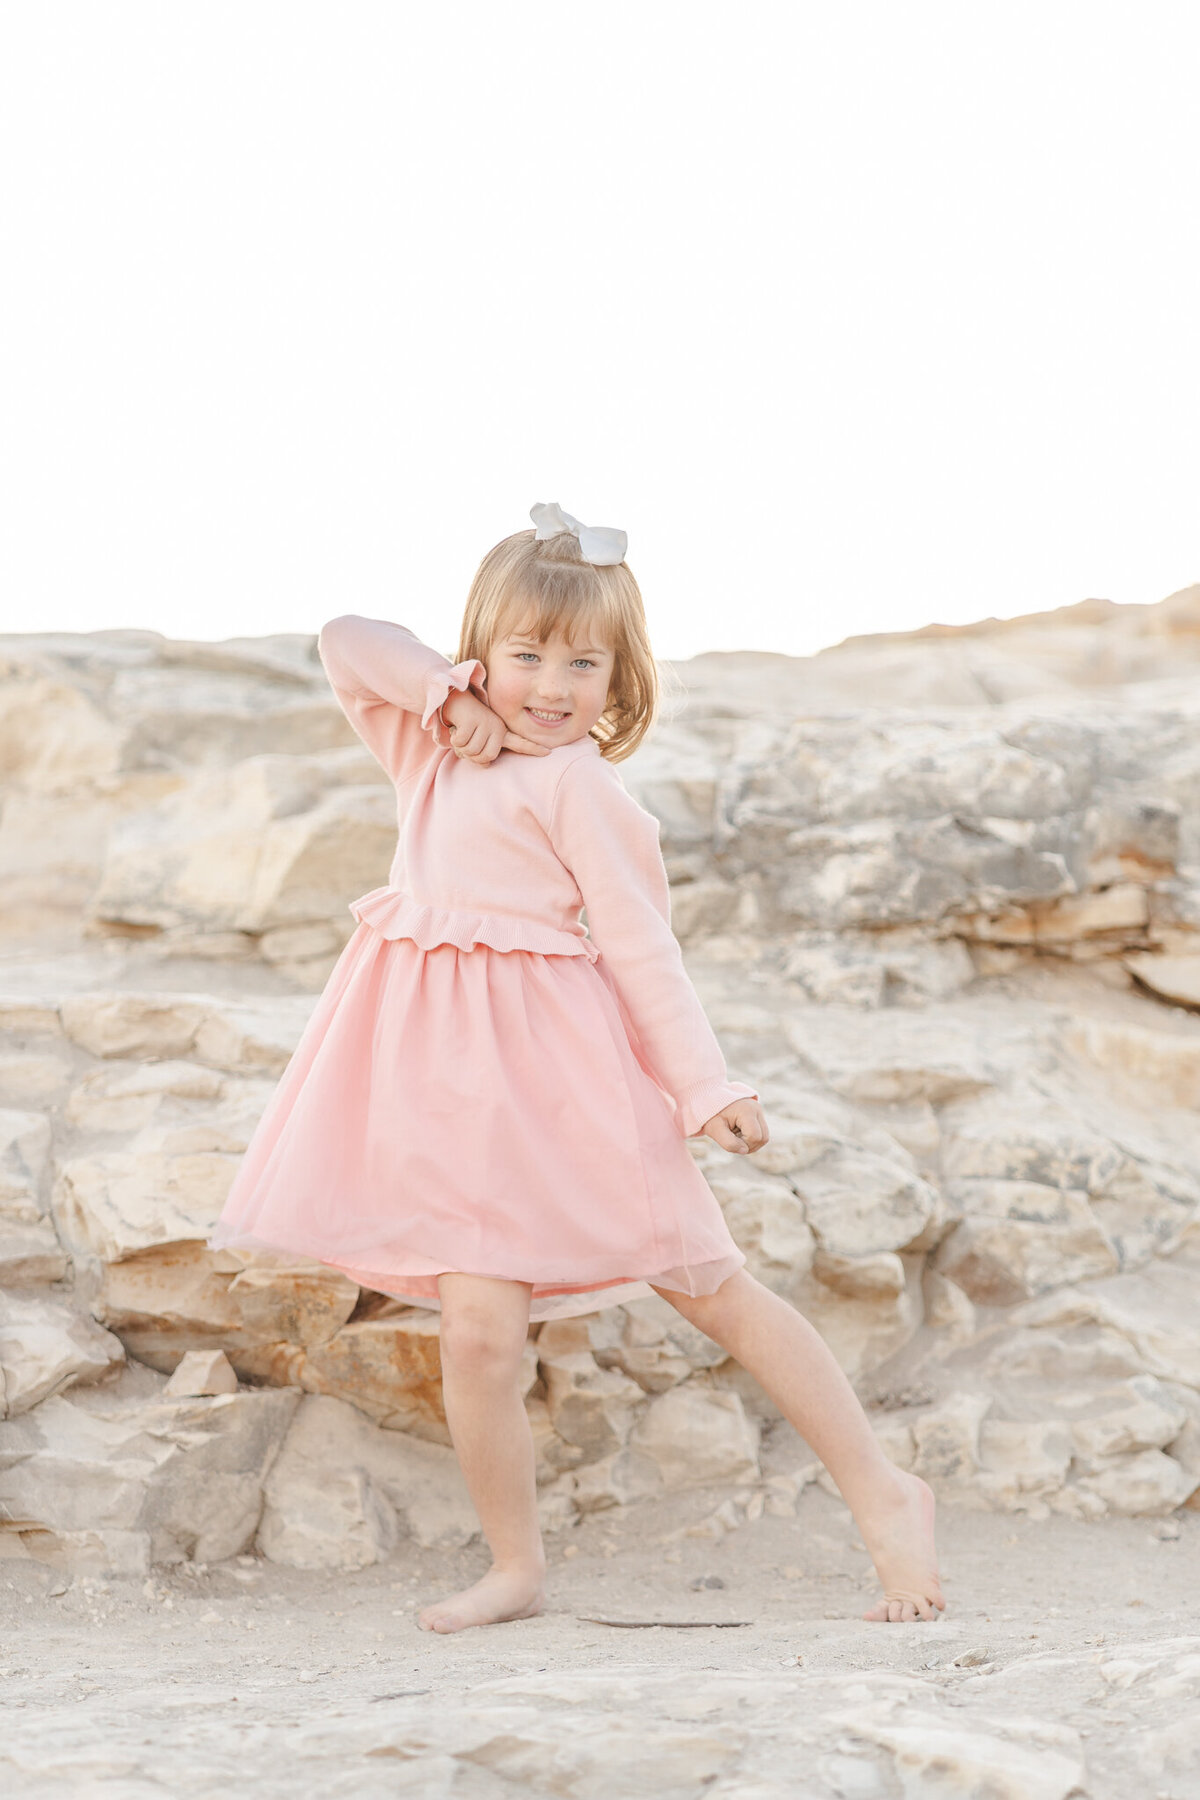 young girl in a pink dress striking a pose for the camera